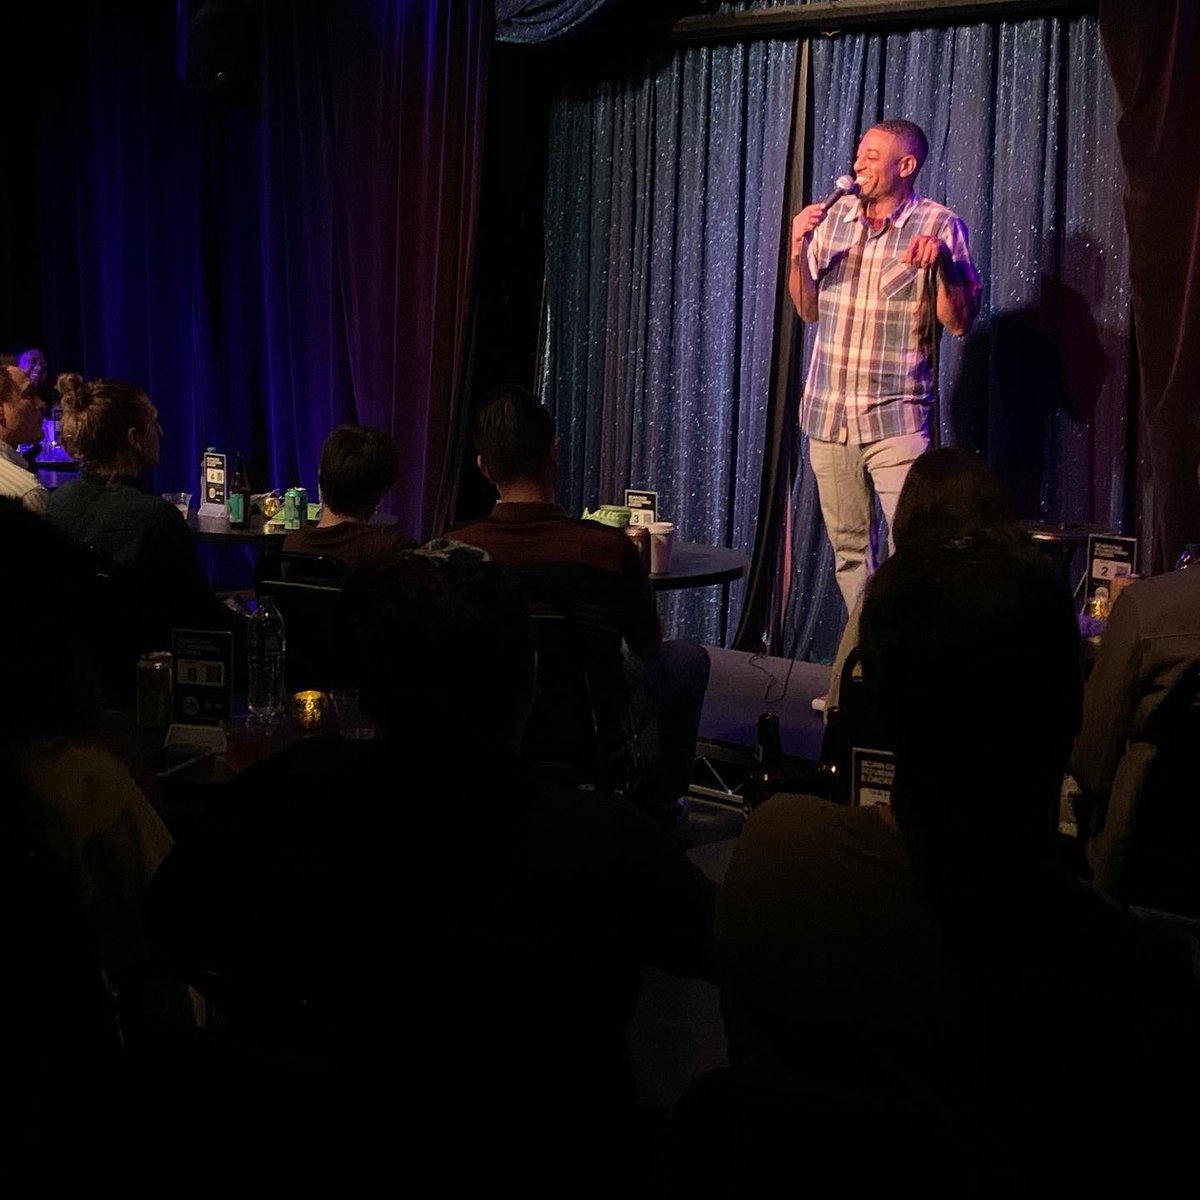 An incredible night at California Comedy Club with Jeff Leach @jeffleach Presents featuring Subhah Agarwal @Subhah Evan Williams @ItsEvanWilliams London Hughes @TheLondonHughes Brian Moses @racebanning and Jenny Zigrino @jennyzigrino at Lyric Hyperion Theatre @LyricHyperion!